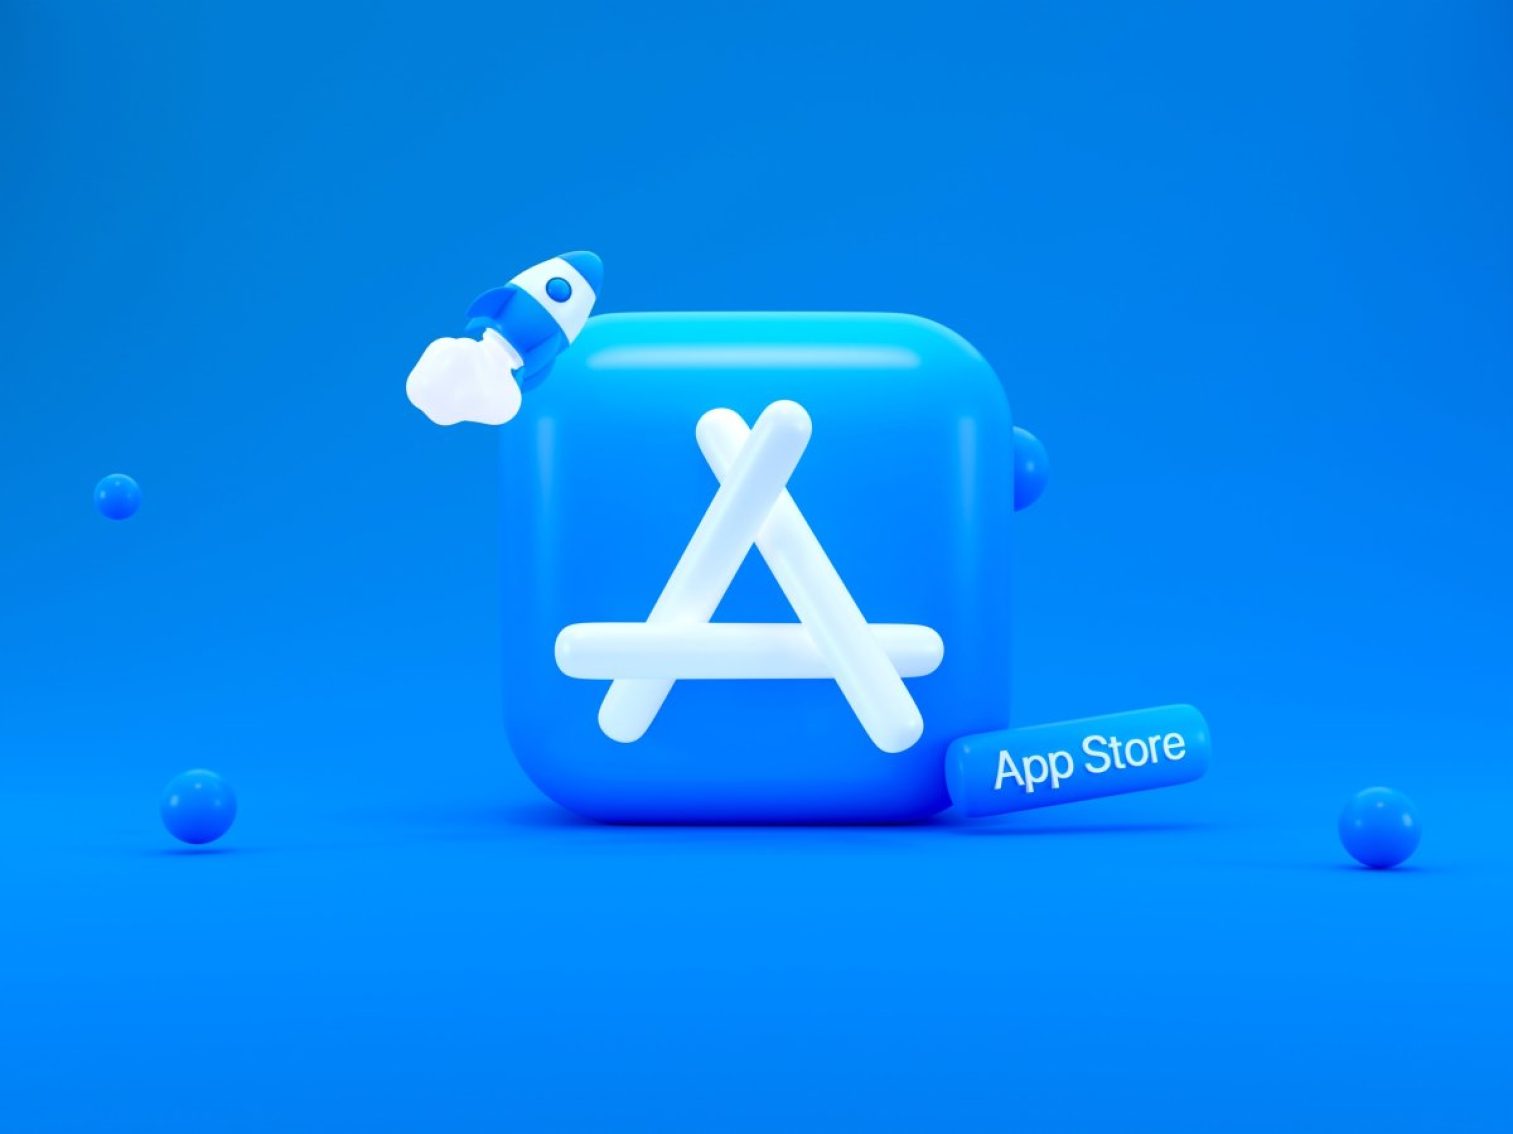 App Store 3D icon. Feel free to contact me through email mariia.shalabaieva@gmail.com Check out my previous collections “Top Cryptocurrencies” and "Elon Musk".